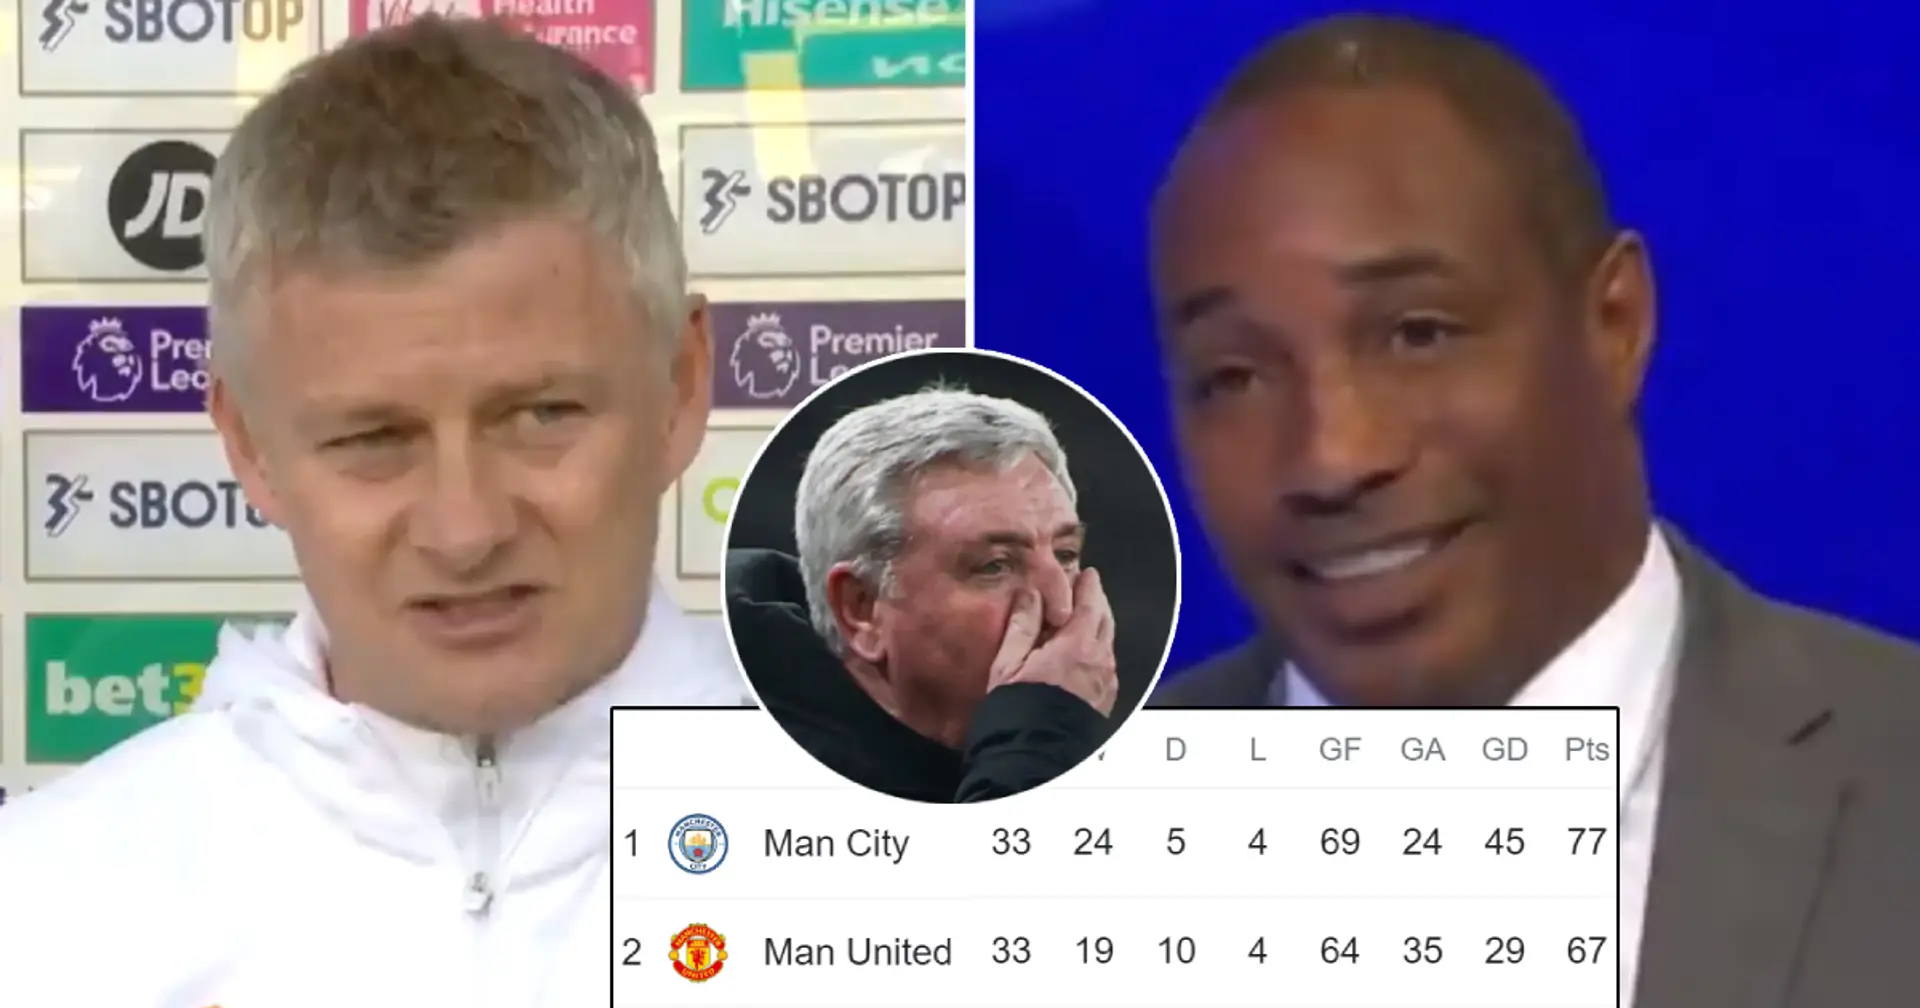 'Steve Bruce or Mark Hughes could have come in and done a better job': Paul Ince renews attack on Solskjaer